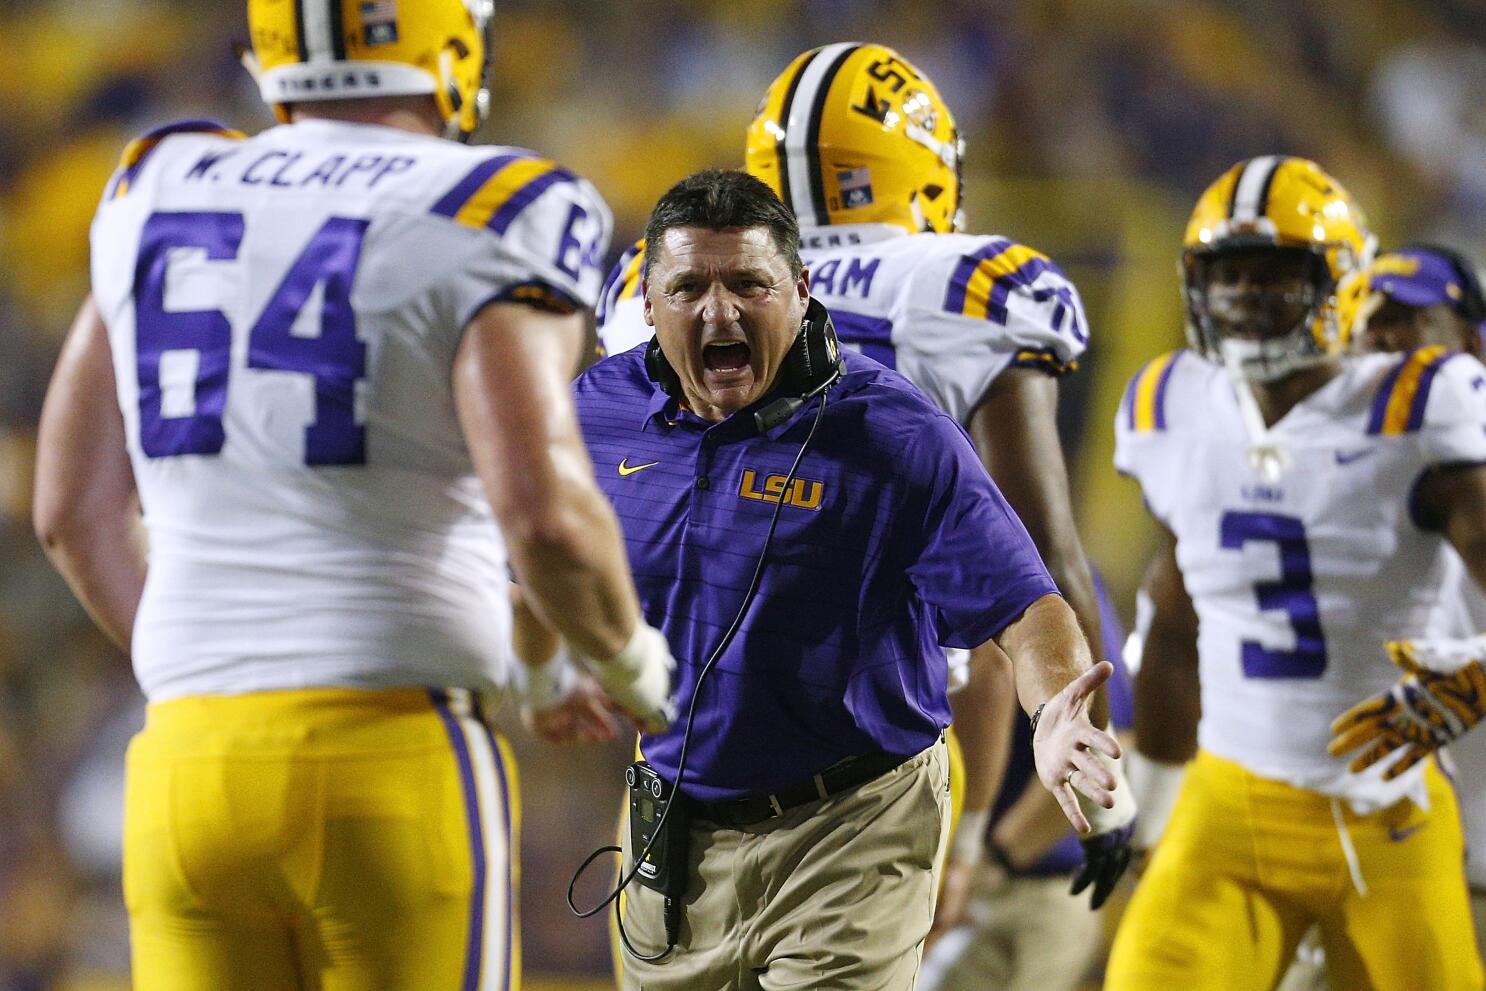 Around the Horn: A look into LSU's National Championship season